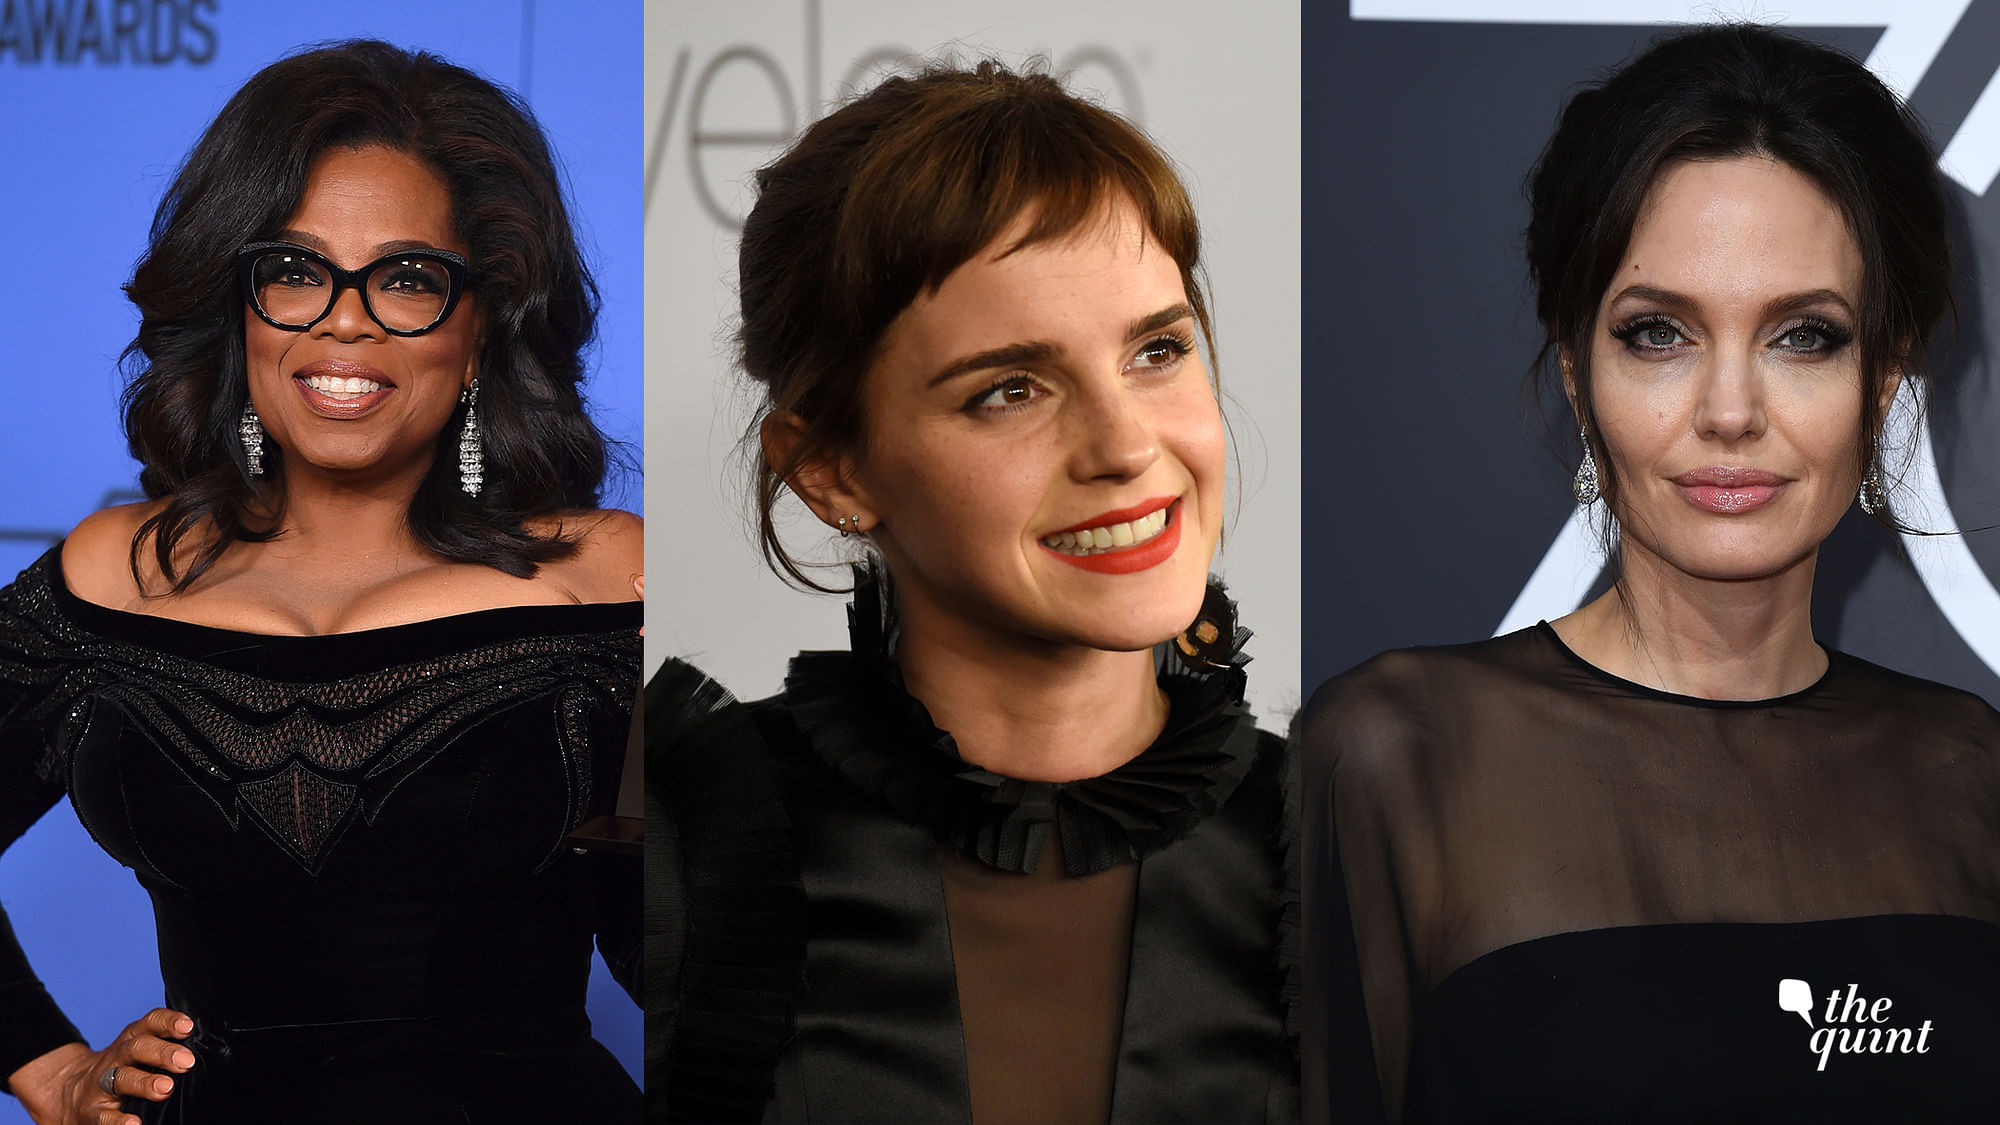 Celebs dress in all black to support ‘Time’s Up’ initiative seeking to end sexual harassment